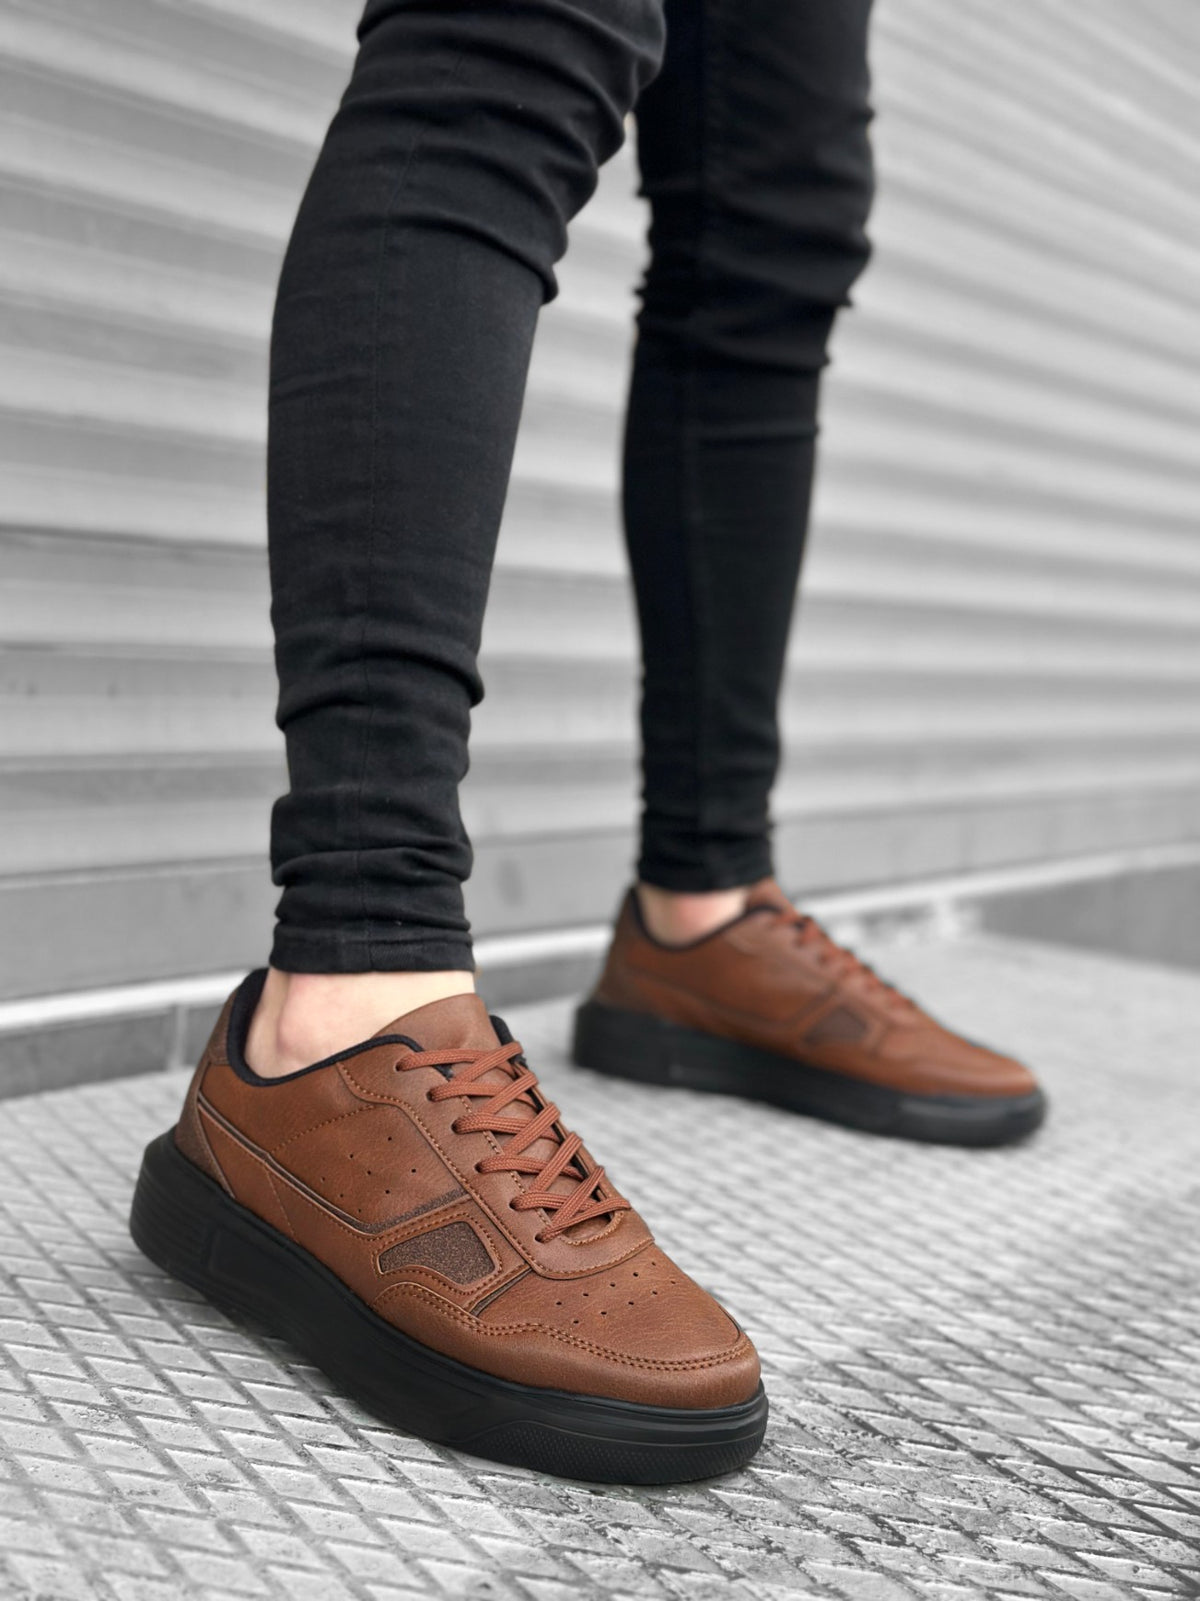 BA0221 BOA Thick High Sole Lace-Up Tan Black Men's Sneakers Shoes - STREETMODE™